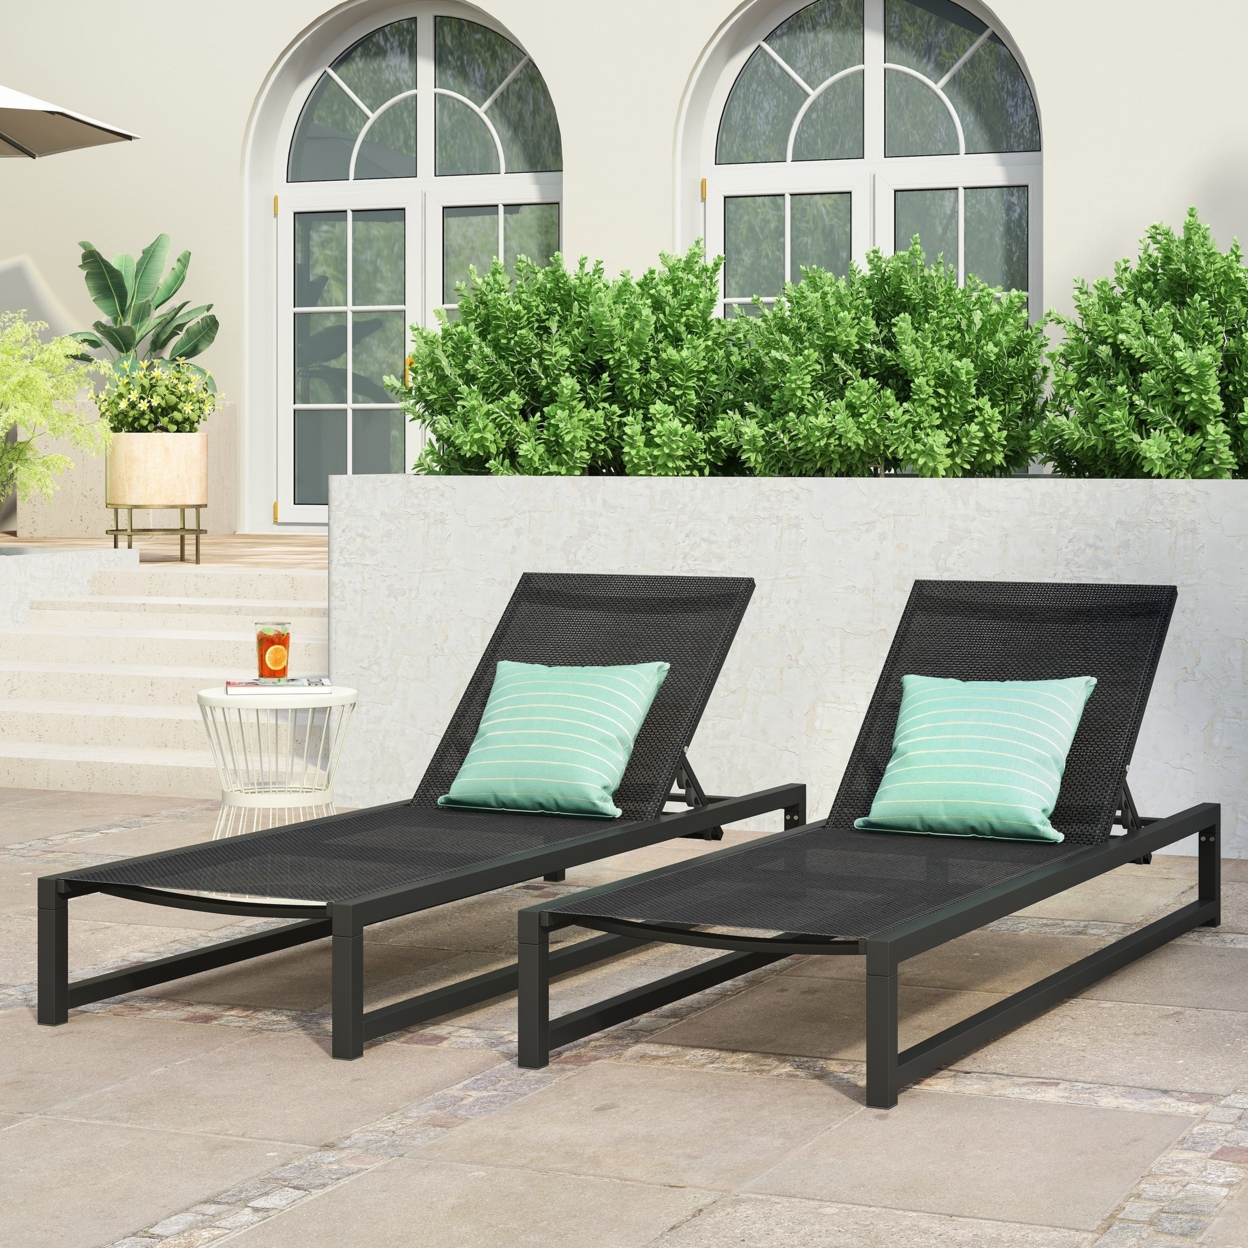 Moderna Outdoor Aluminum Chaise Lounge With Mesh Seating (Set Of 2) - Black